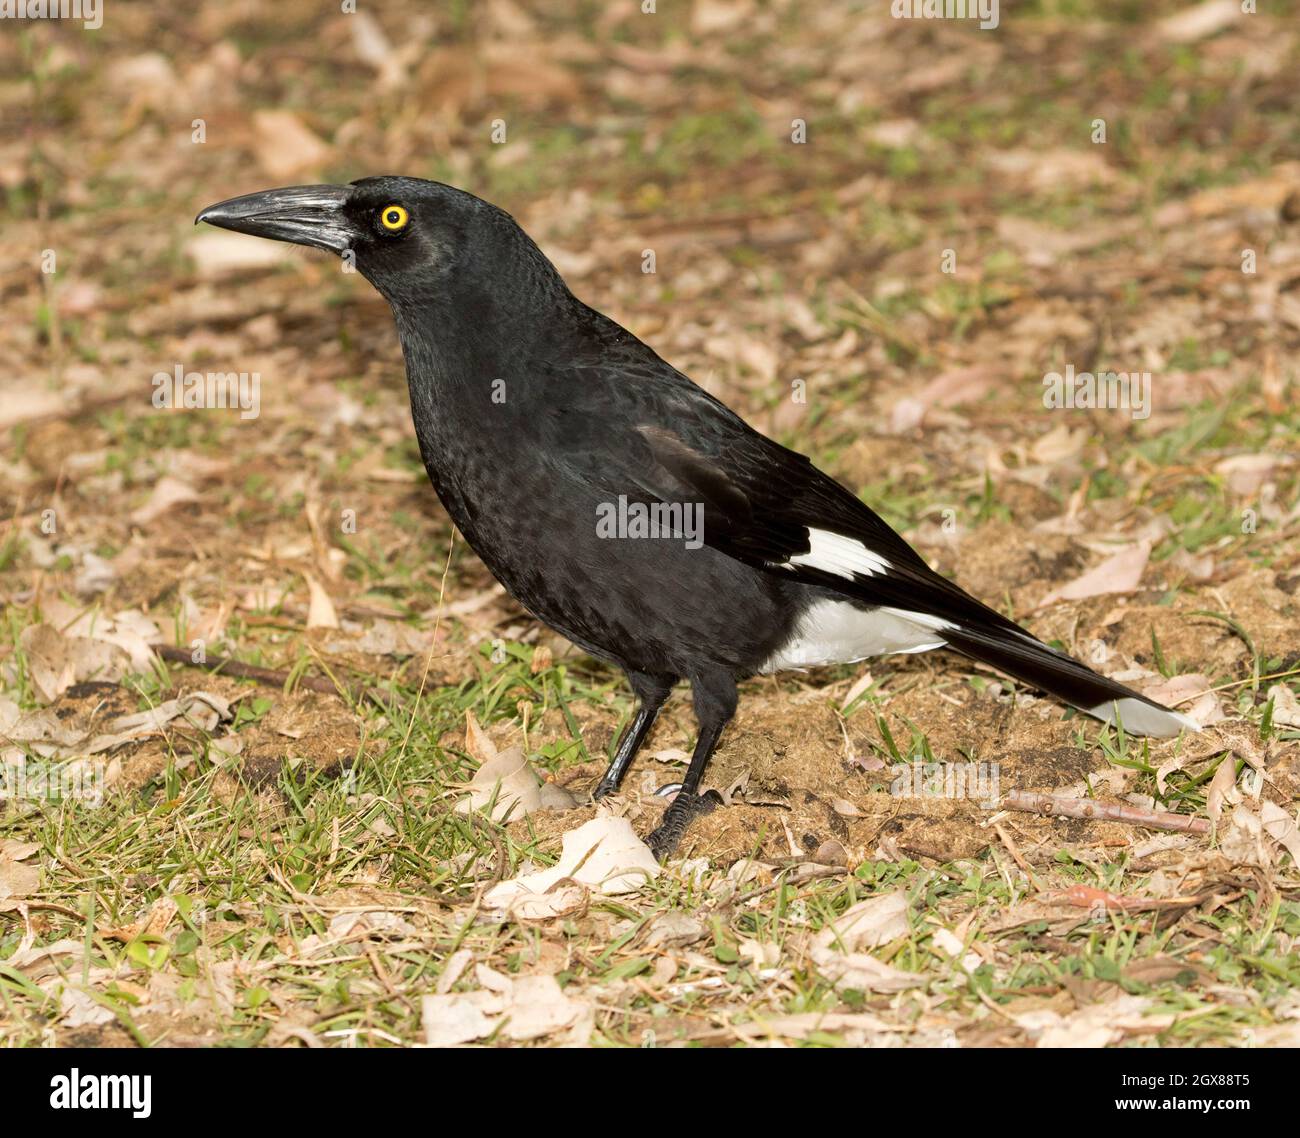 Pied Currawong, Strepera graculina, on the ground, in Kroombit Tops National Park, Queensland Australia Stock Photo